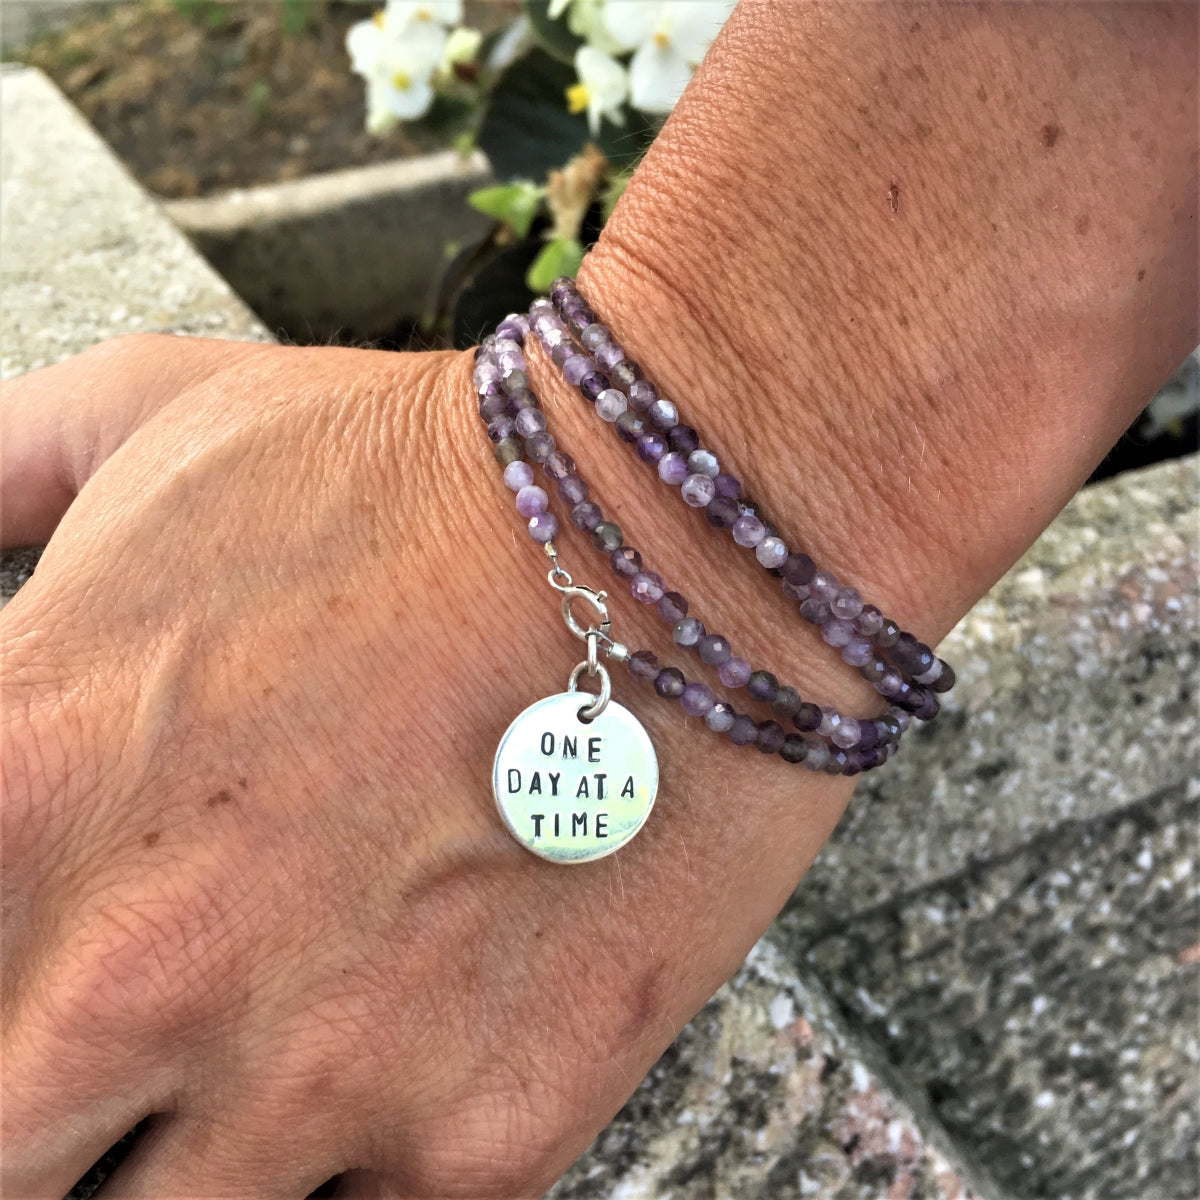 One Day at a Time - Inspirational Amethyst Wrap Bracelet. Calming and Stress Relief Bracelet.